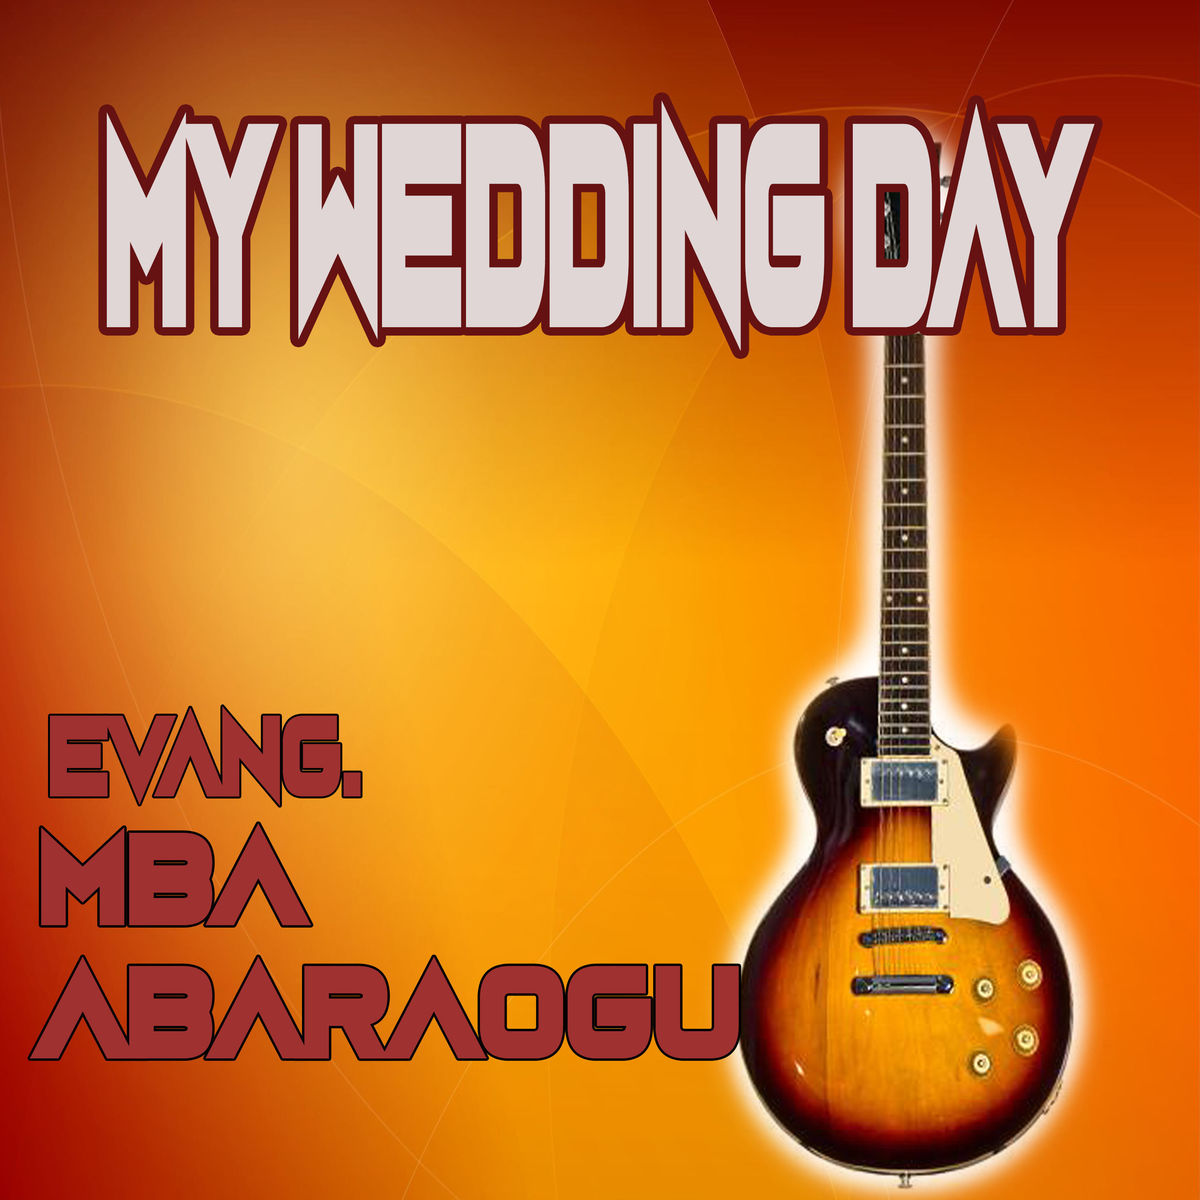 Evang. Mba Abaraogu - You The One mp3 download